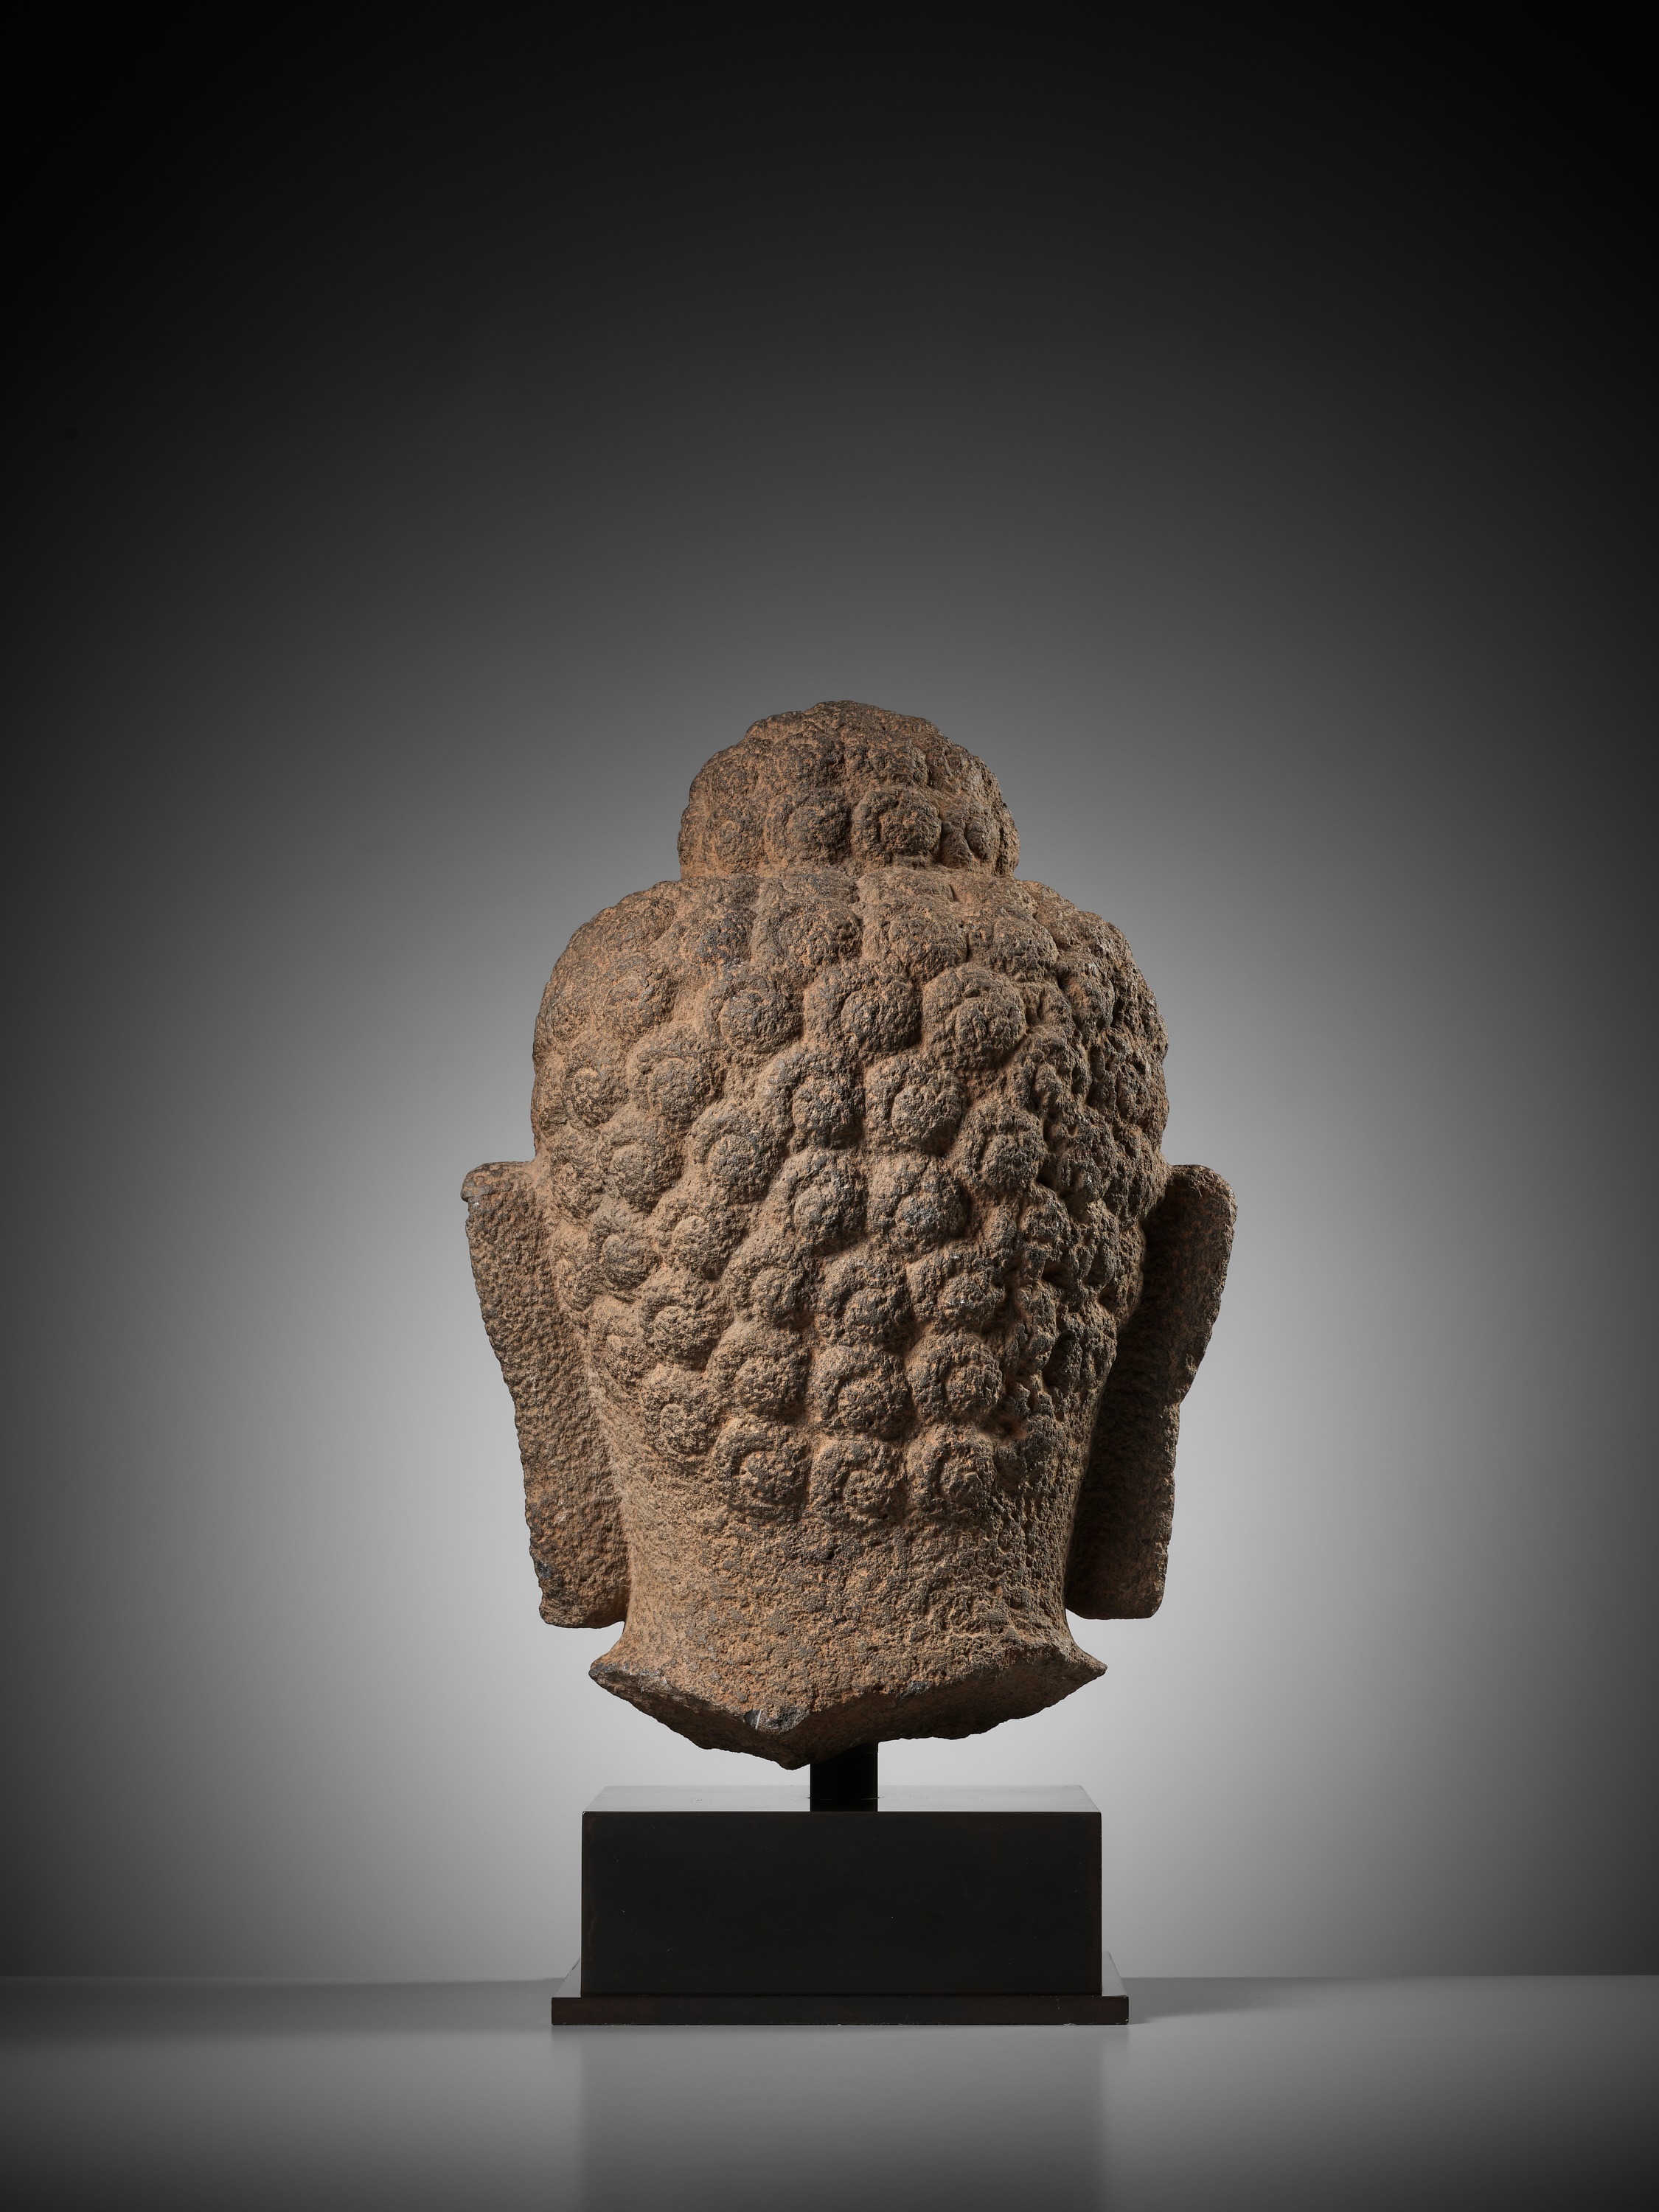 A LARGE ANDESITE HEAD OF BUDDHA, INDONESIA, CENTRAL JAVA, 9TH CENTURY - Image 10 of 10